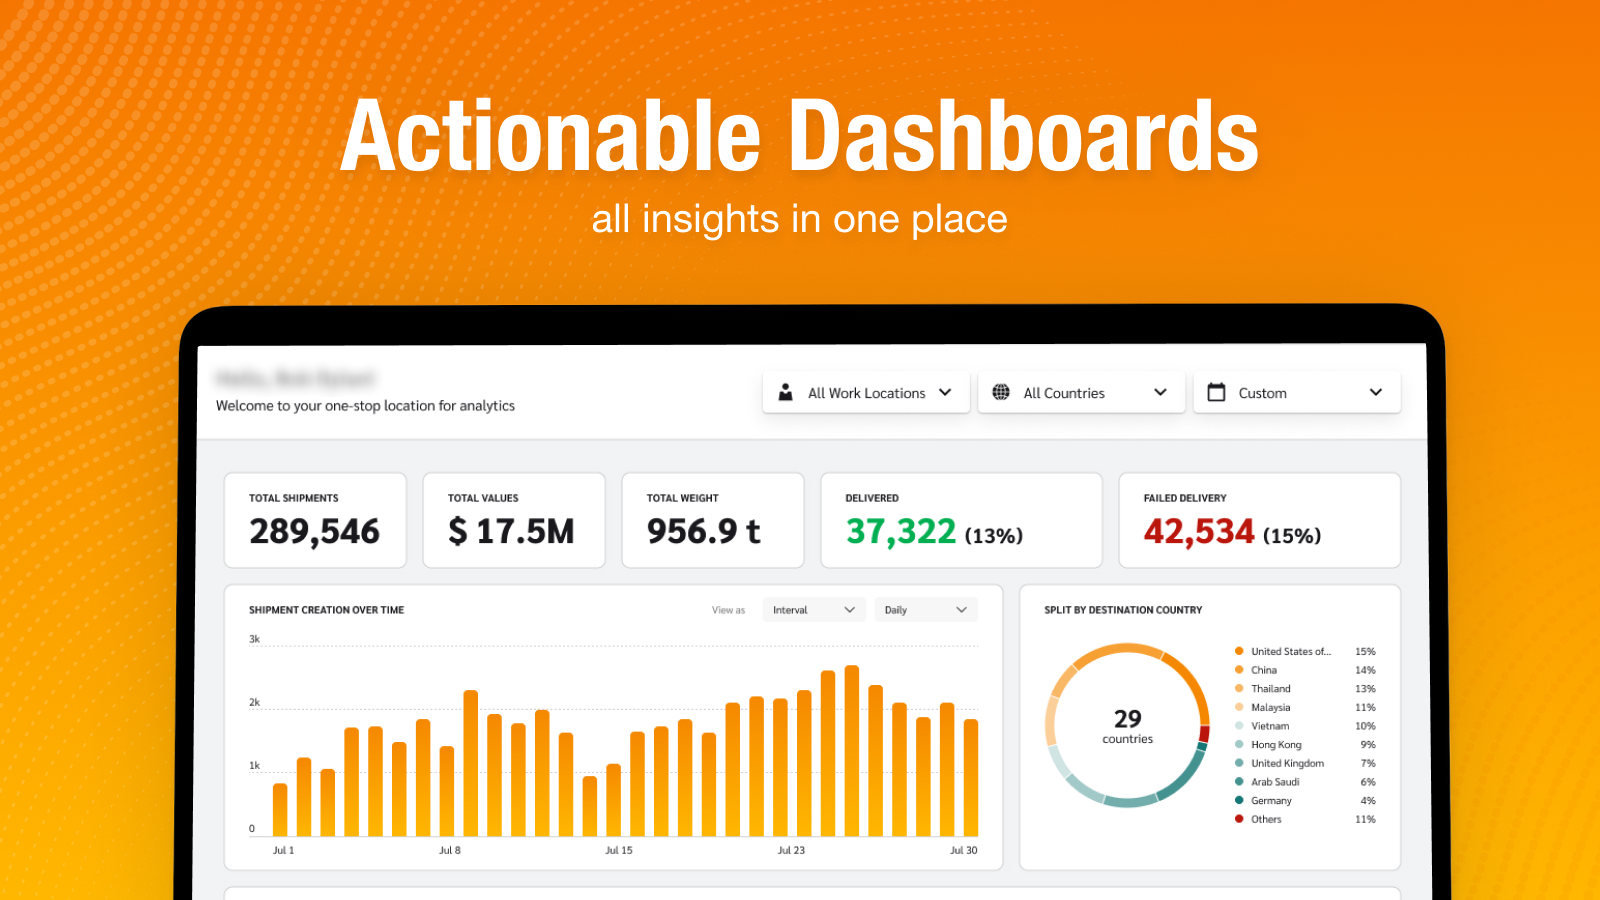 Actionable Dashboards